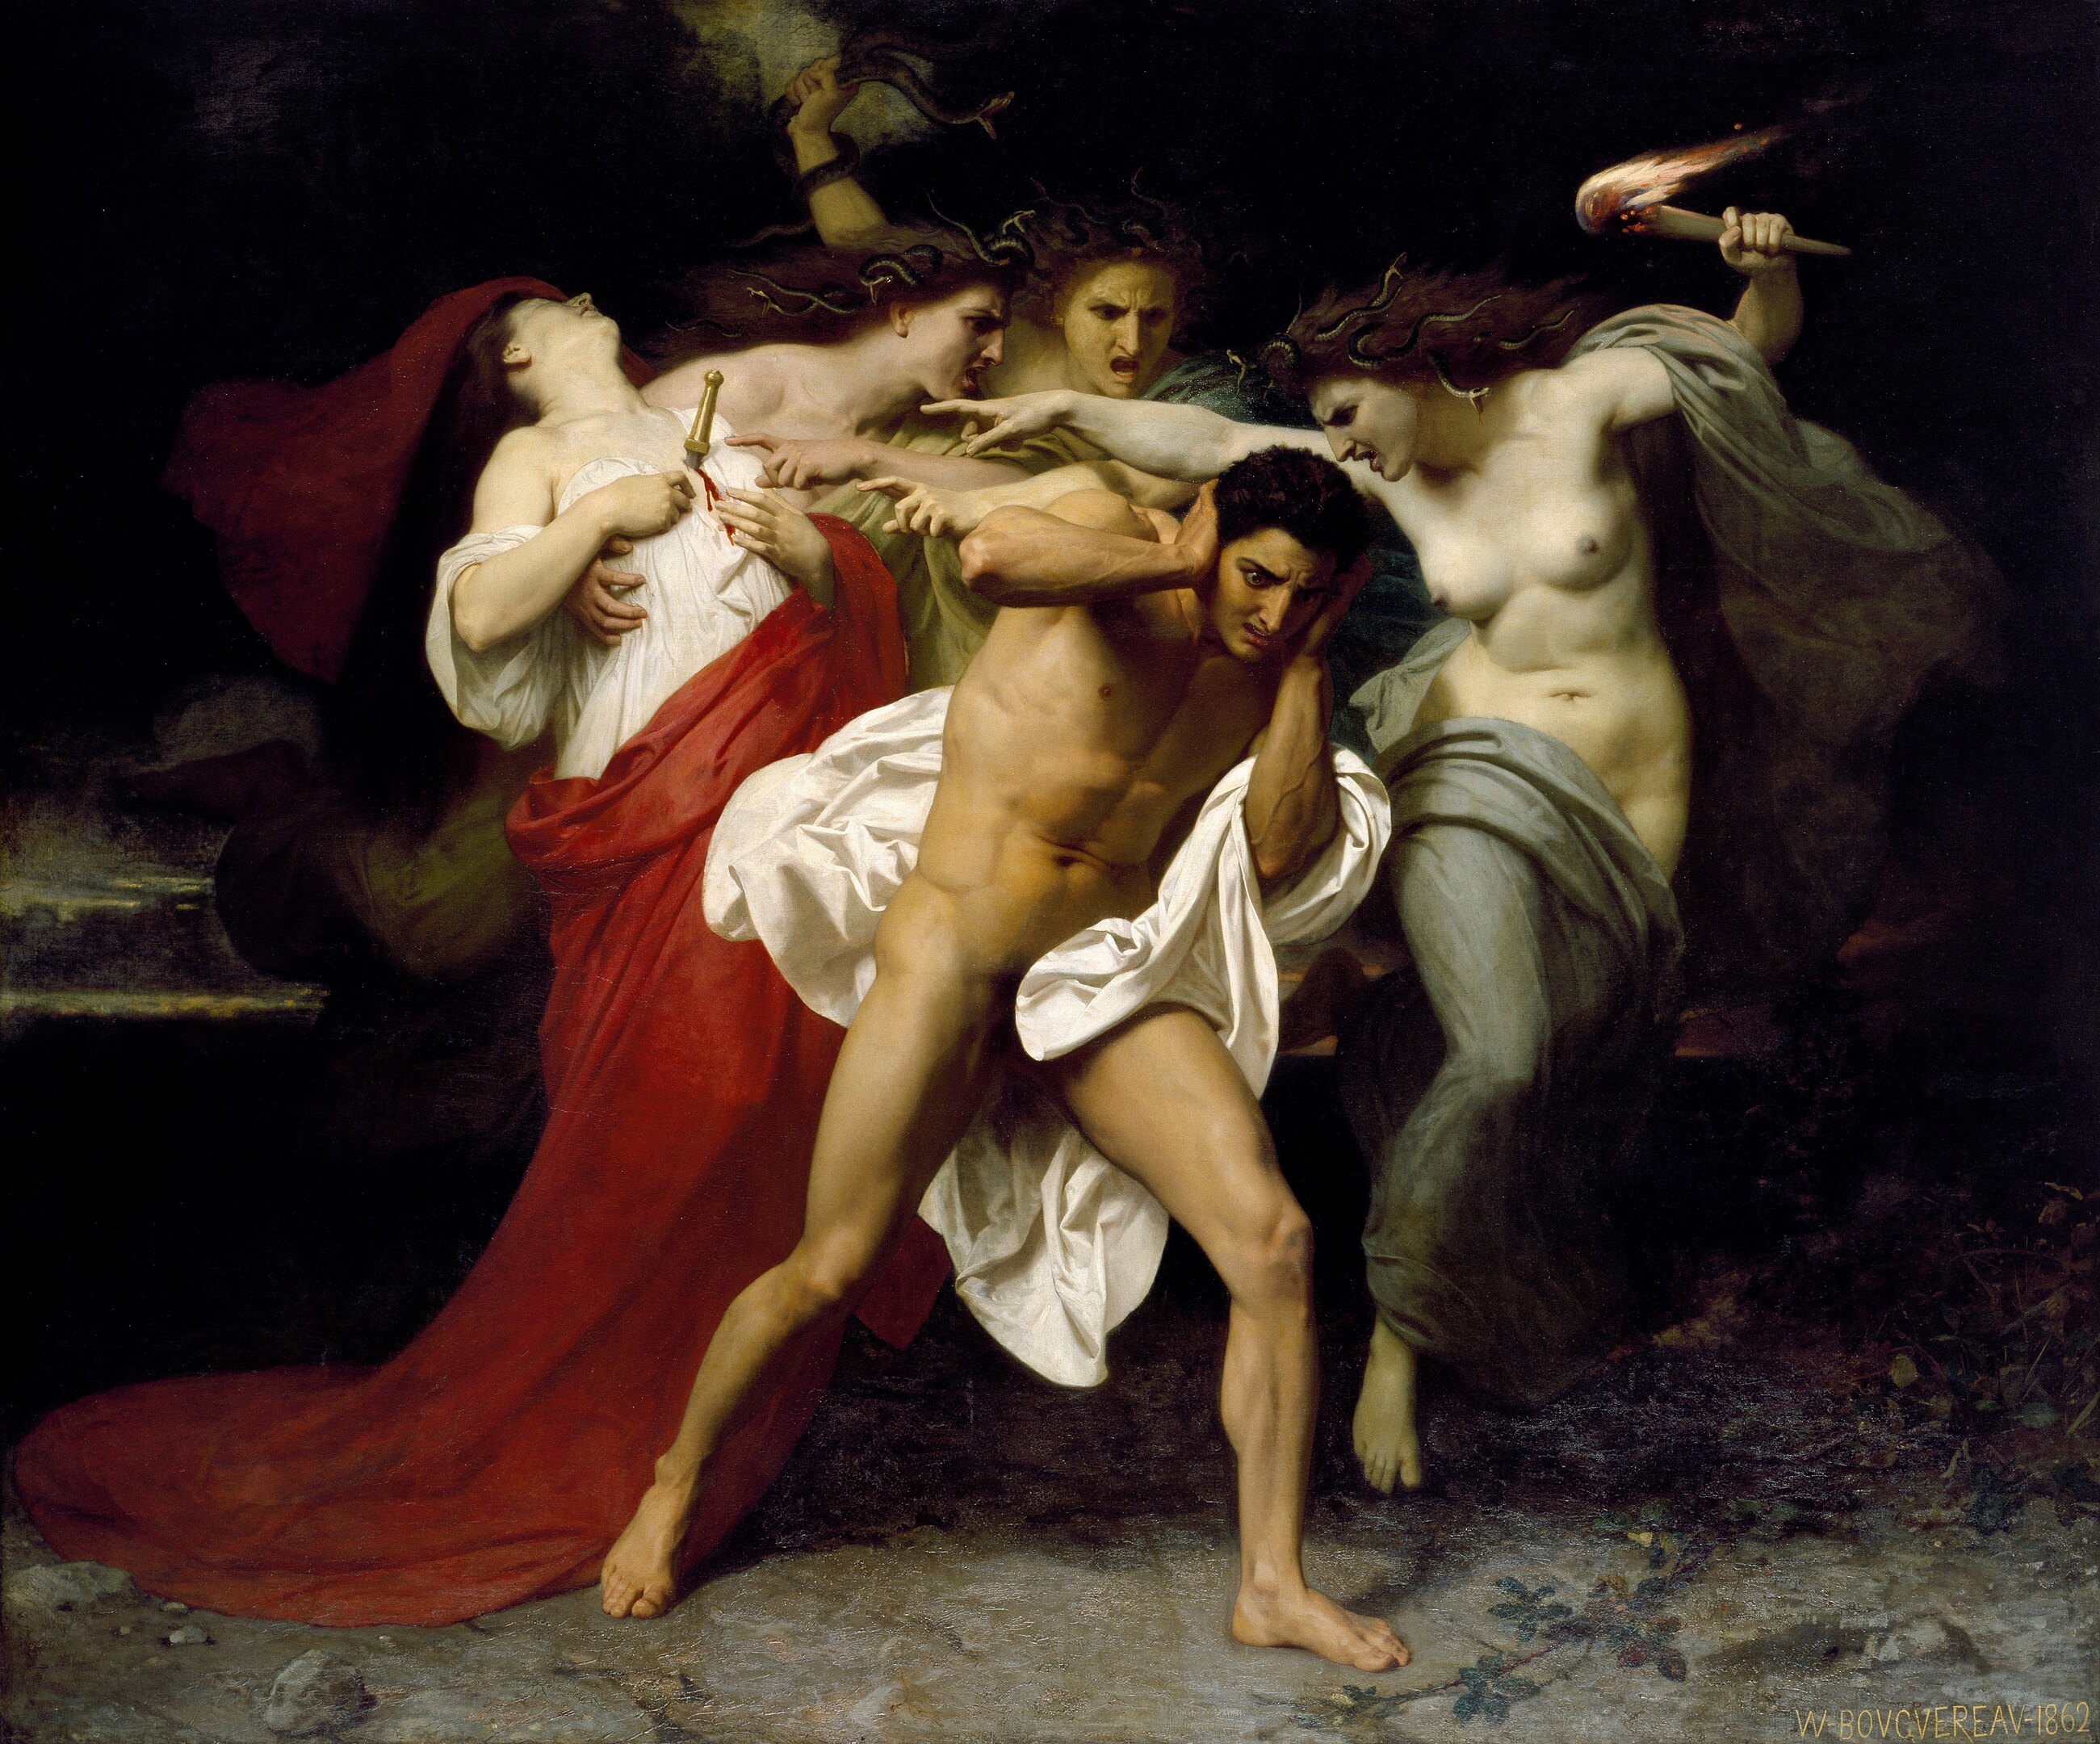 Orestes Pursued by the Furies by William-Adolphe Bouguereau - 1862 - 231.1 x 278.4 cm Chrysler Museum of Art